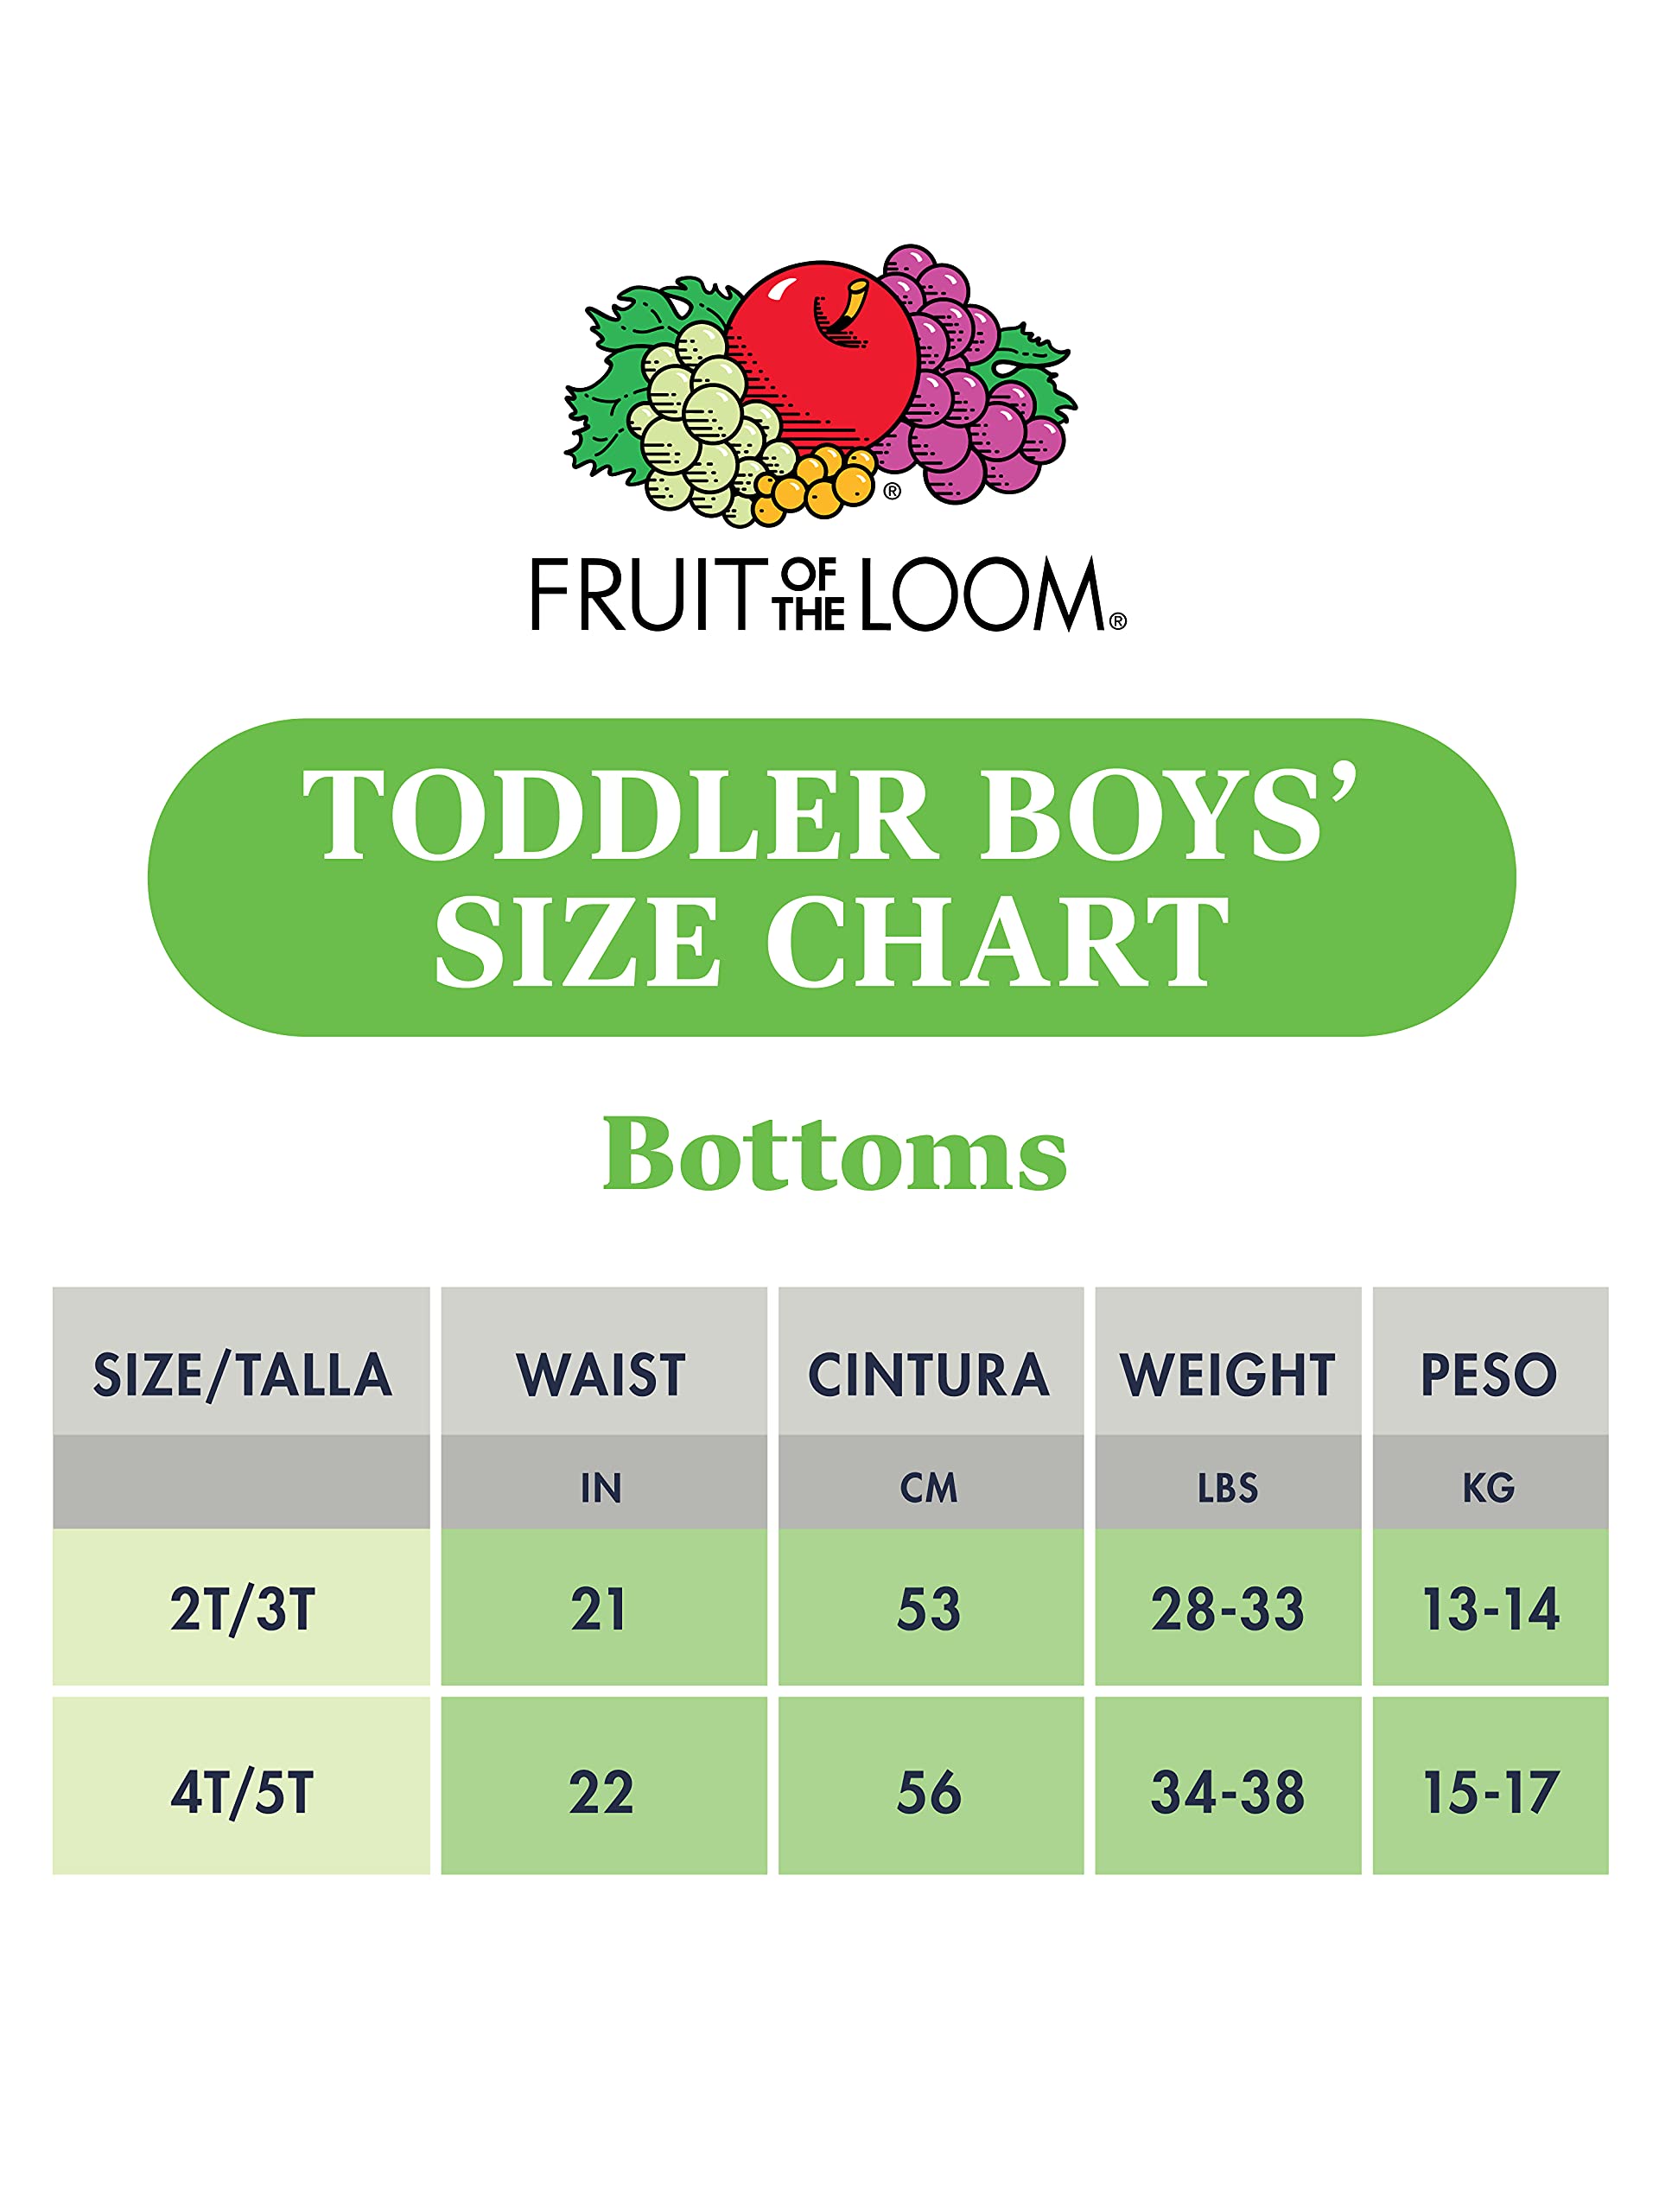 Fruit of the Loom Boys' 7 Pack Assorted Color Toddler Boxer Briefs